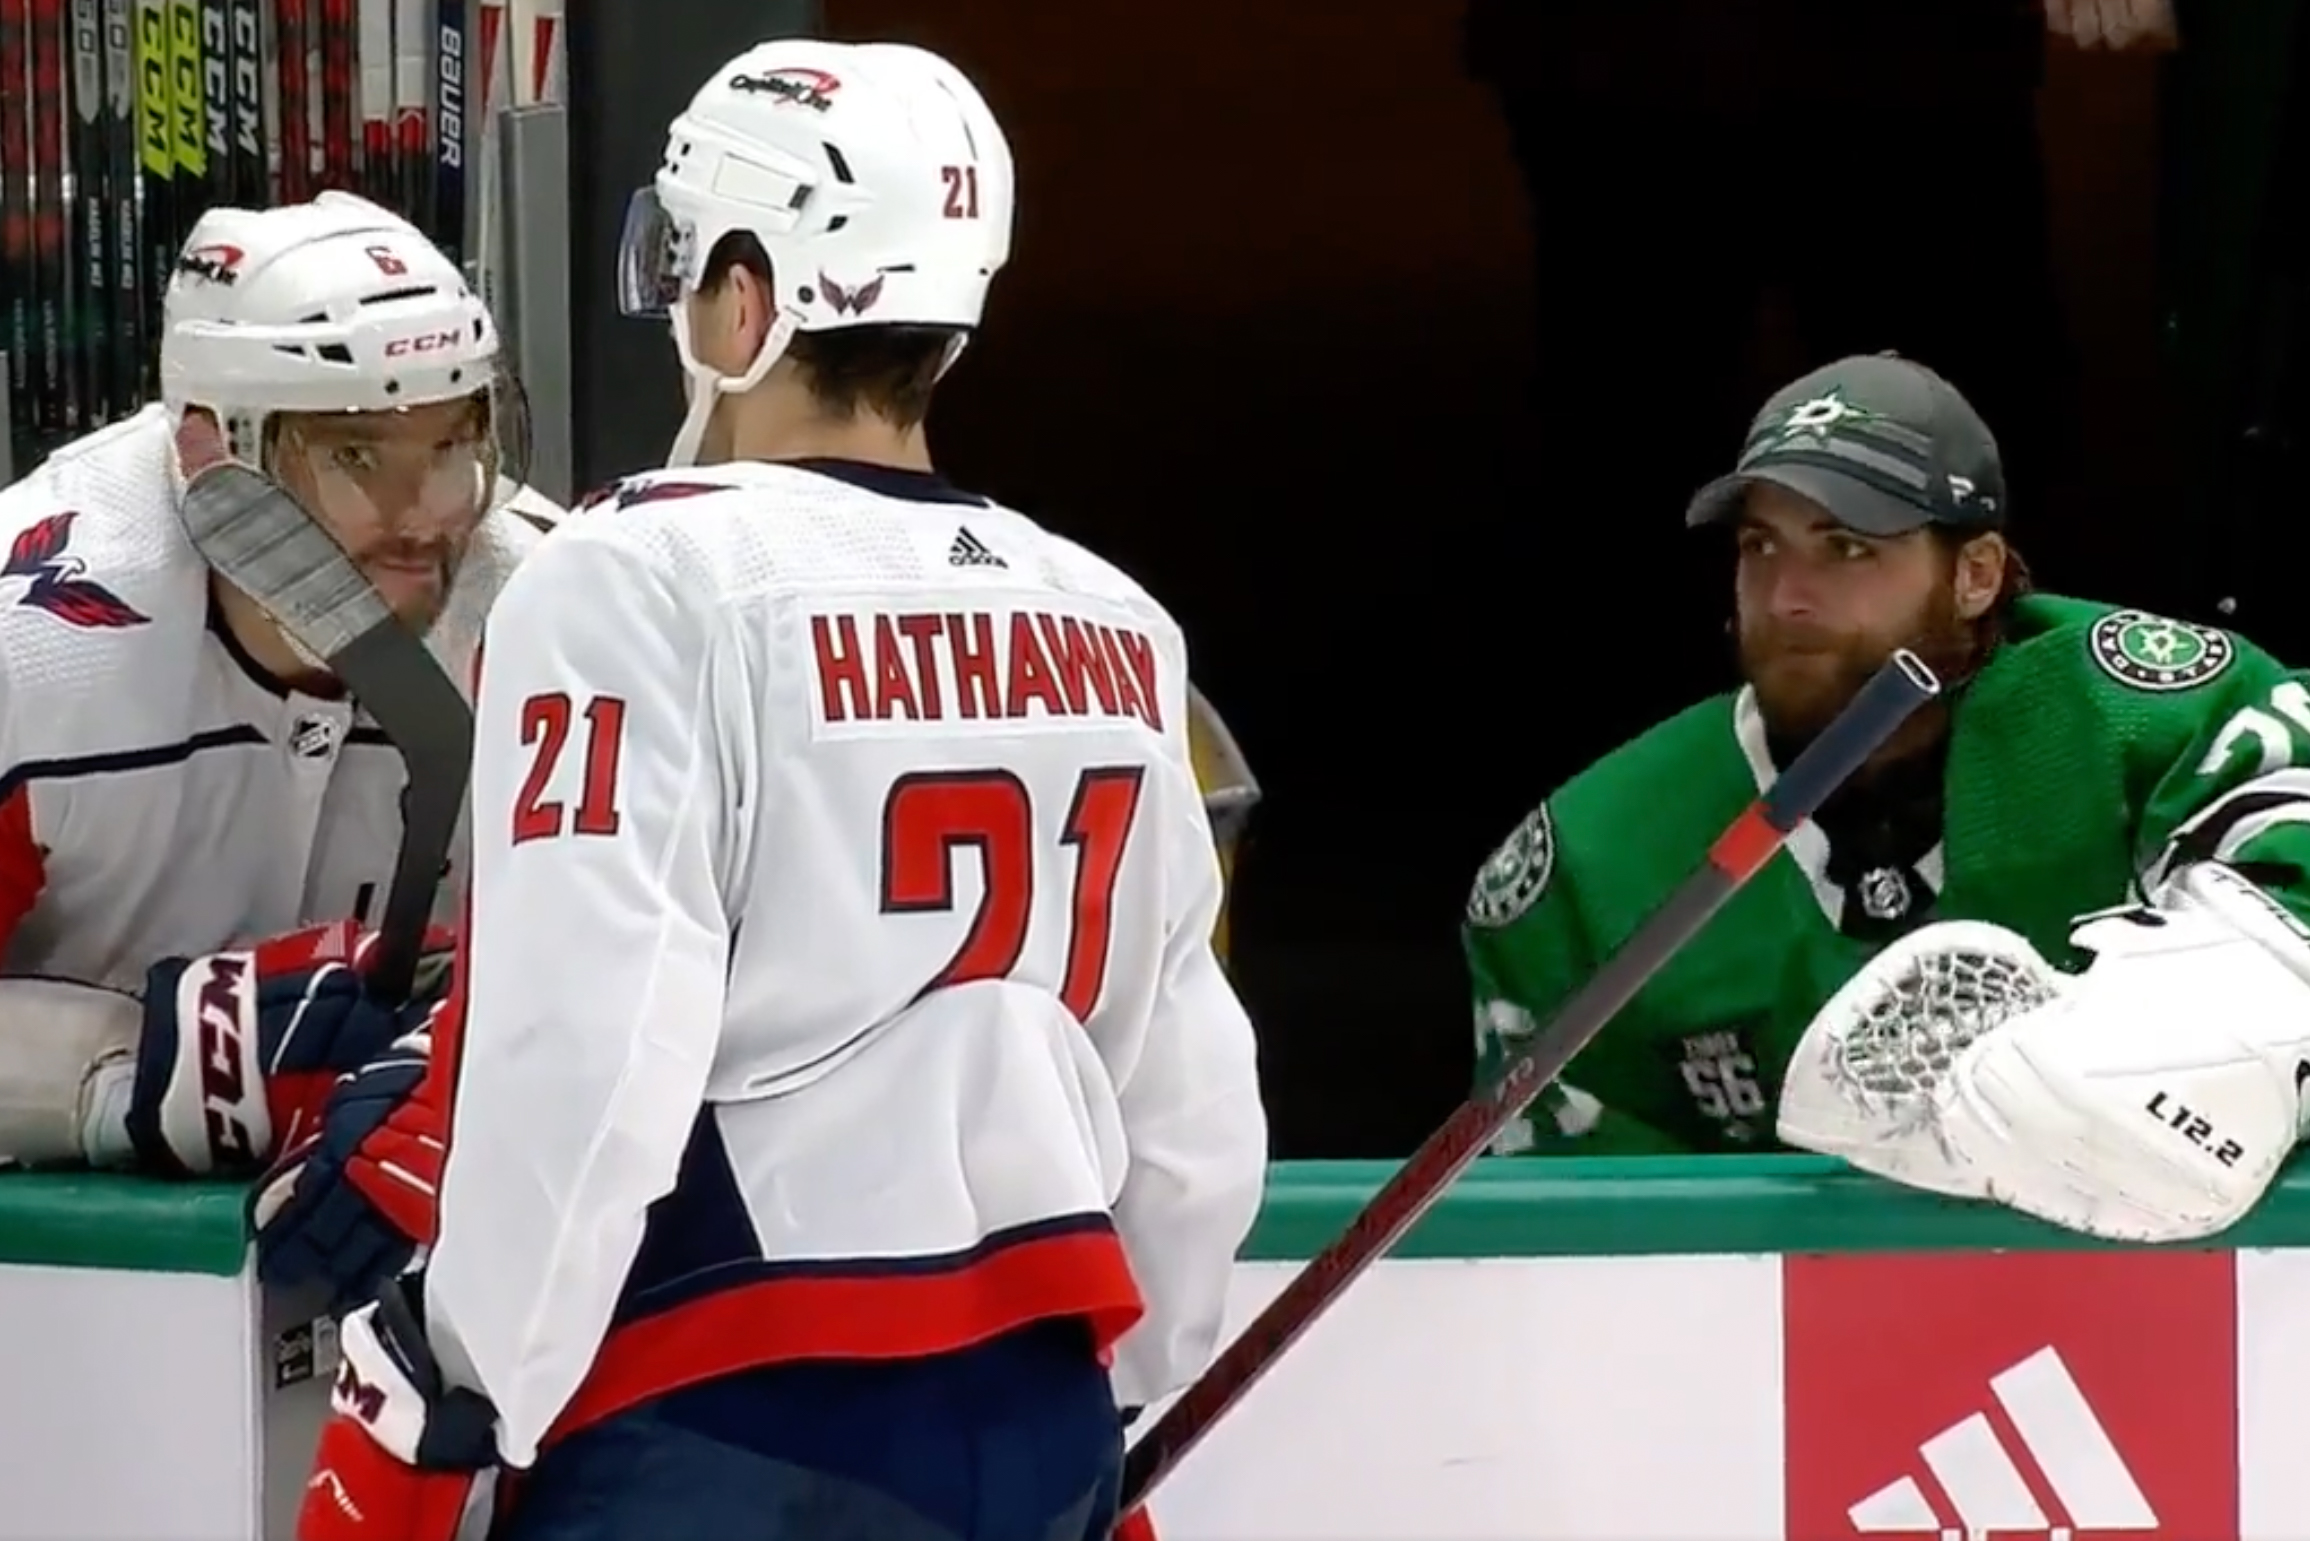 Former Capitals netminder Braden Holtby and Alex Ovechkin